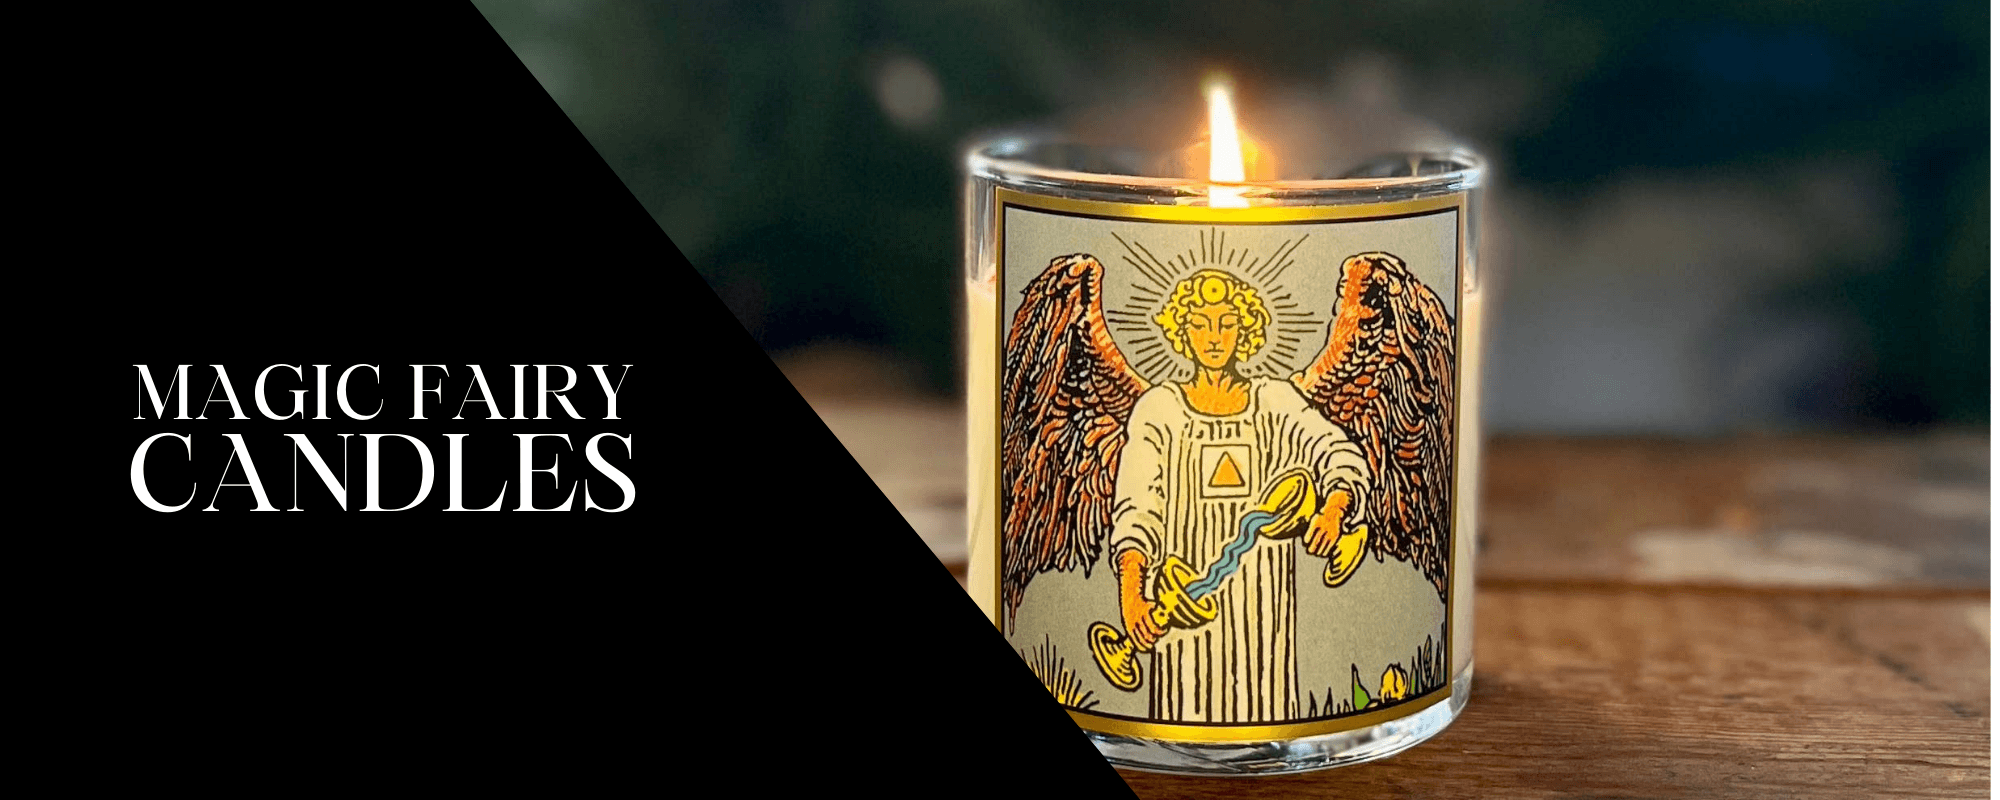 Magic Fairy Candles - The Gilded Witch